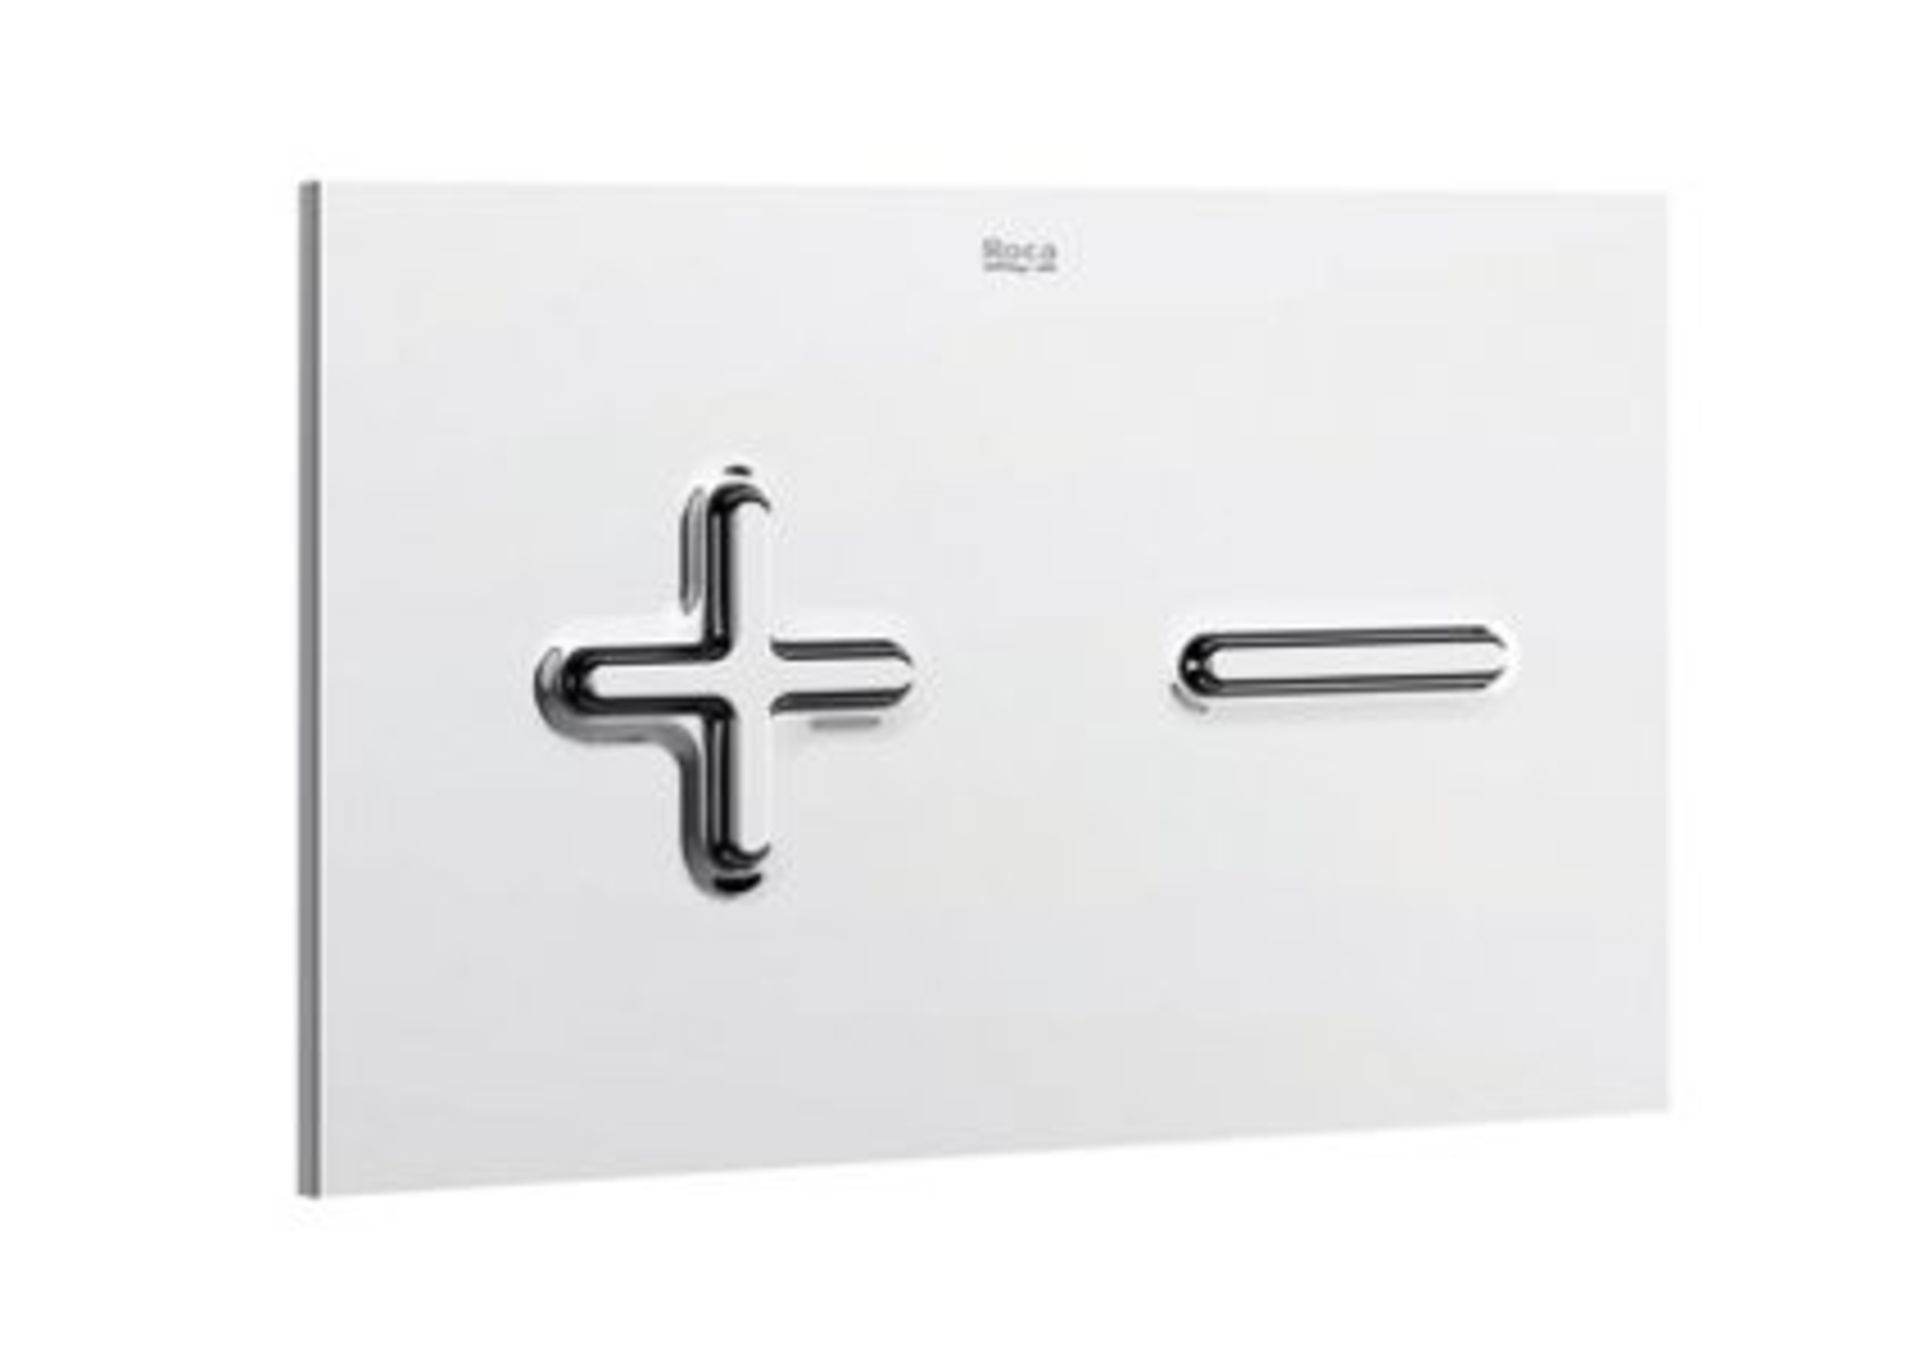 Roca PL6 Dual Chrome Flush Plates, new and boxed, RRP £39 at Cityplumbing.co.uk